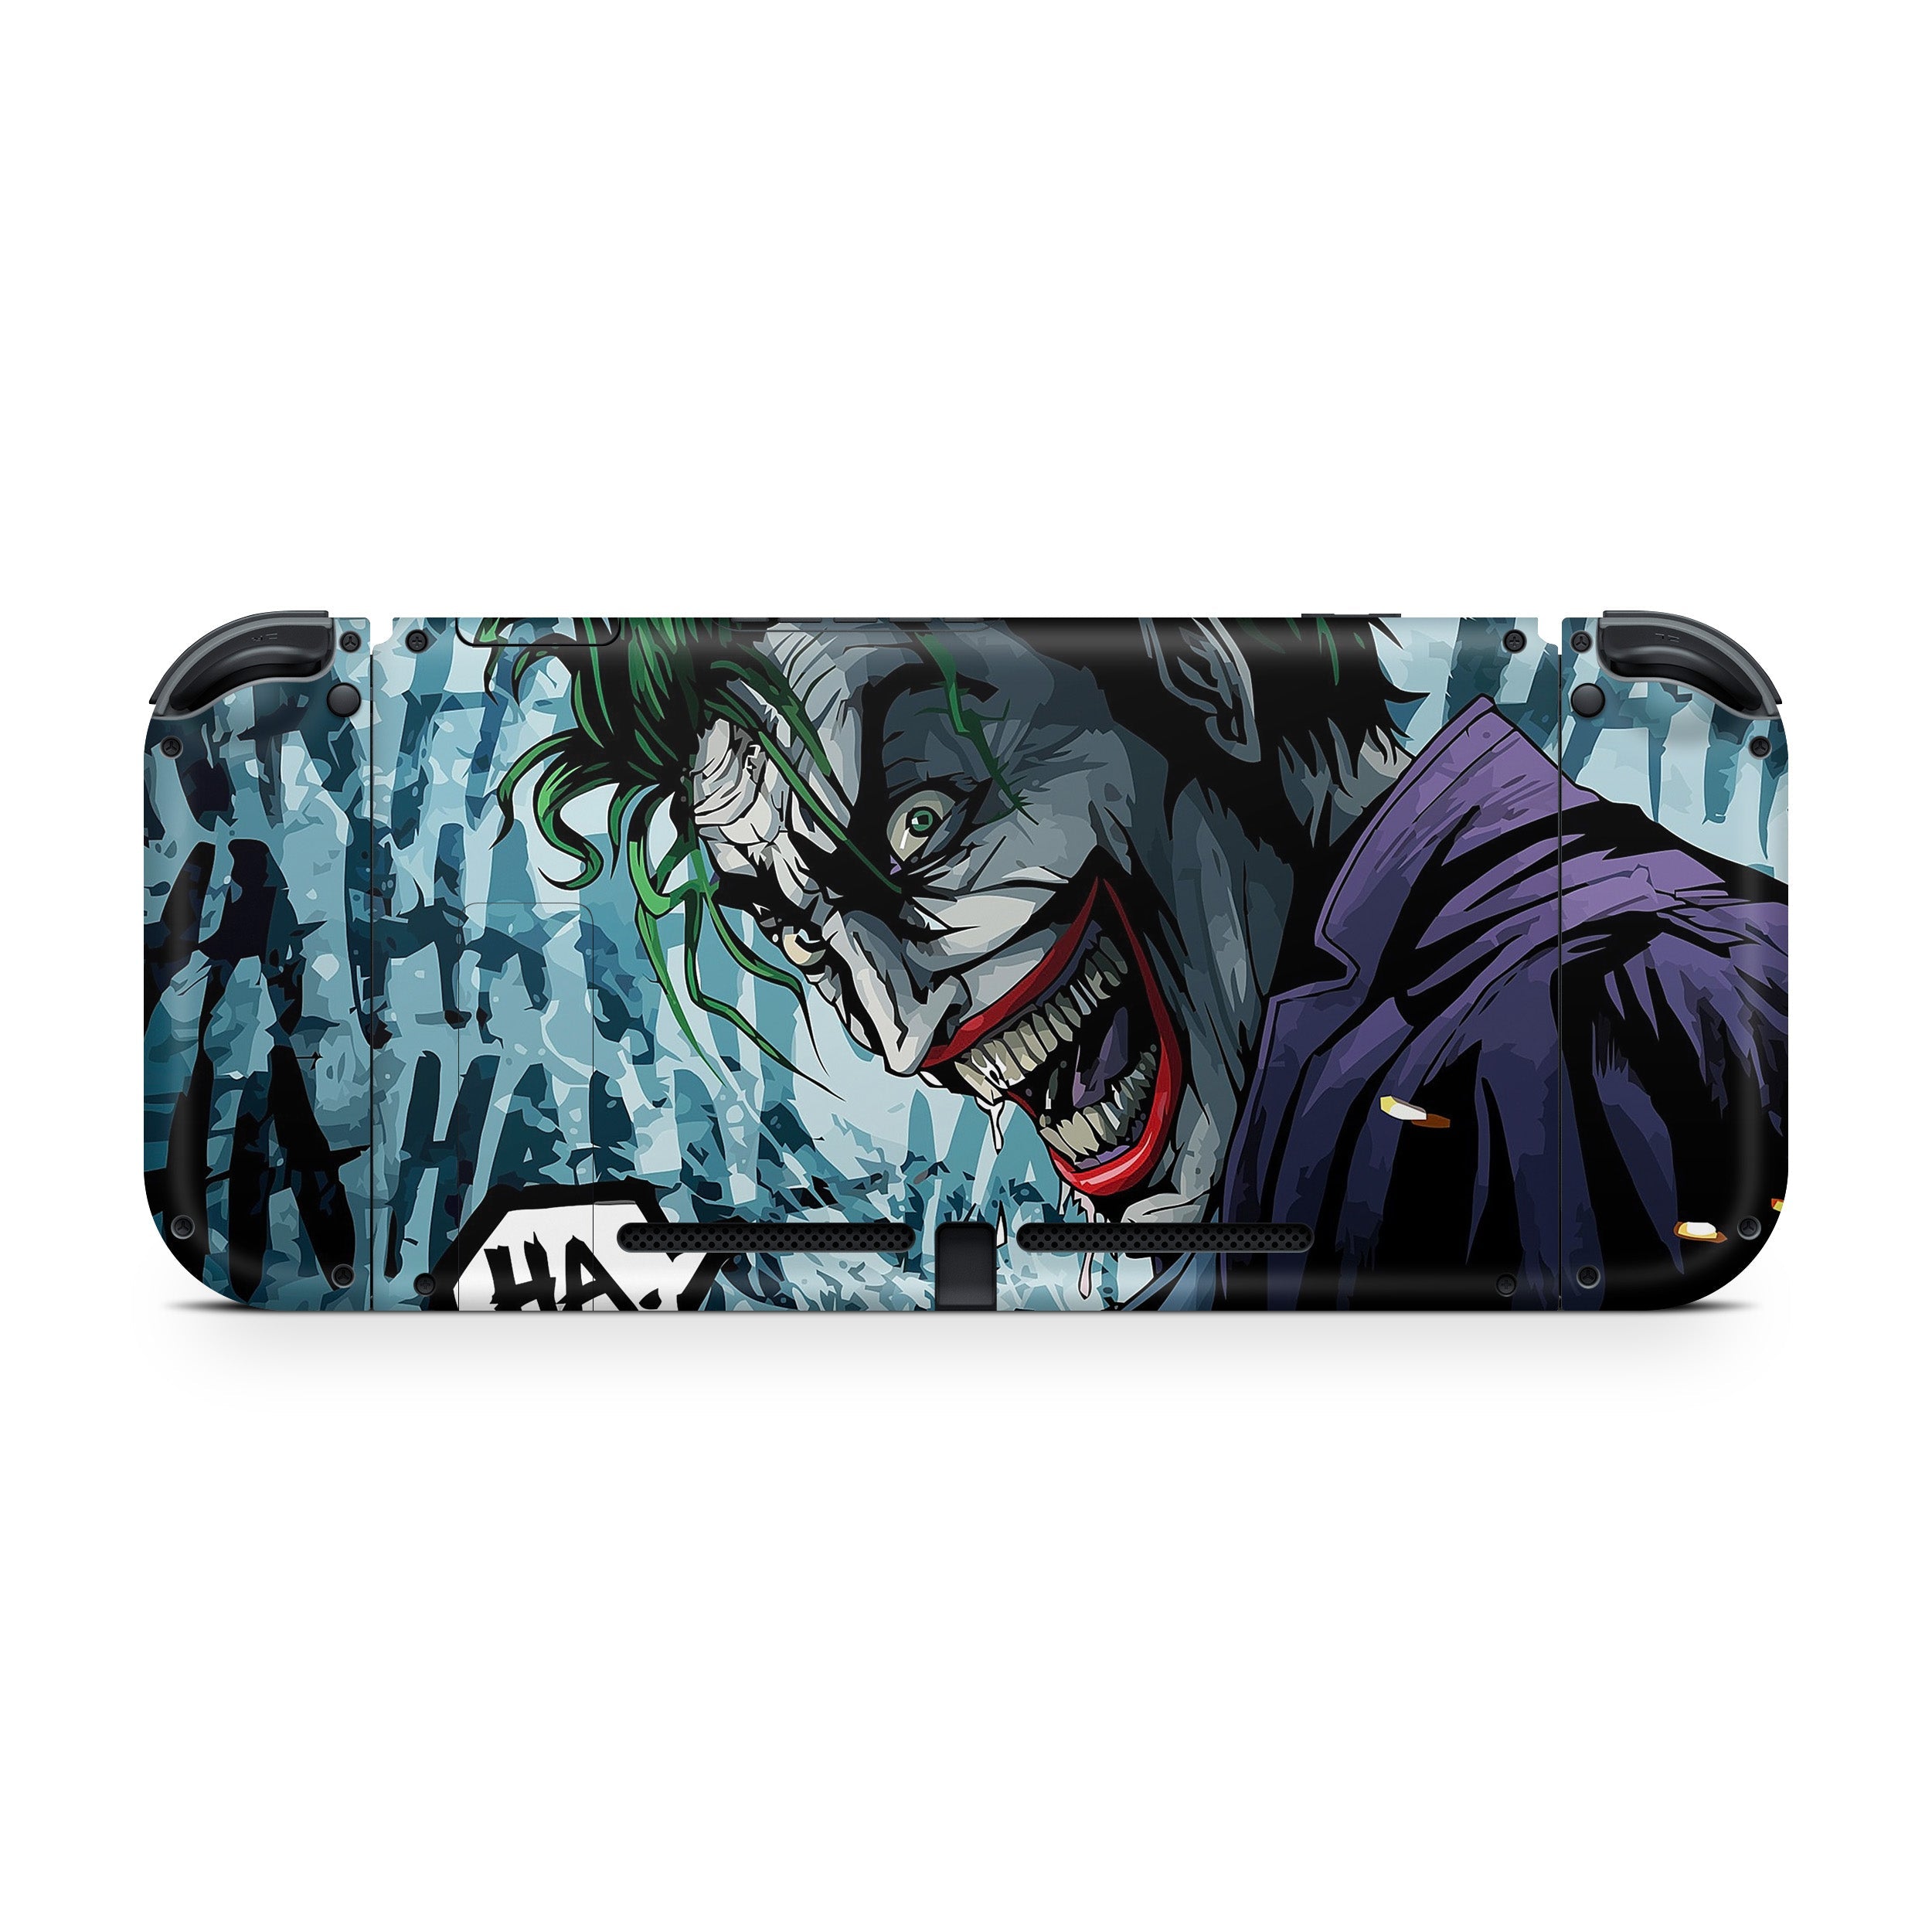 A video game skin featuring a DC Joker design for the Nintendo Switch.